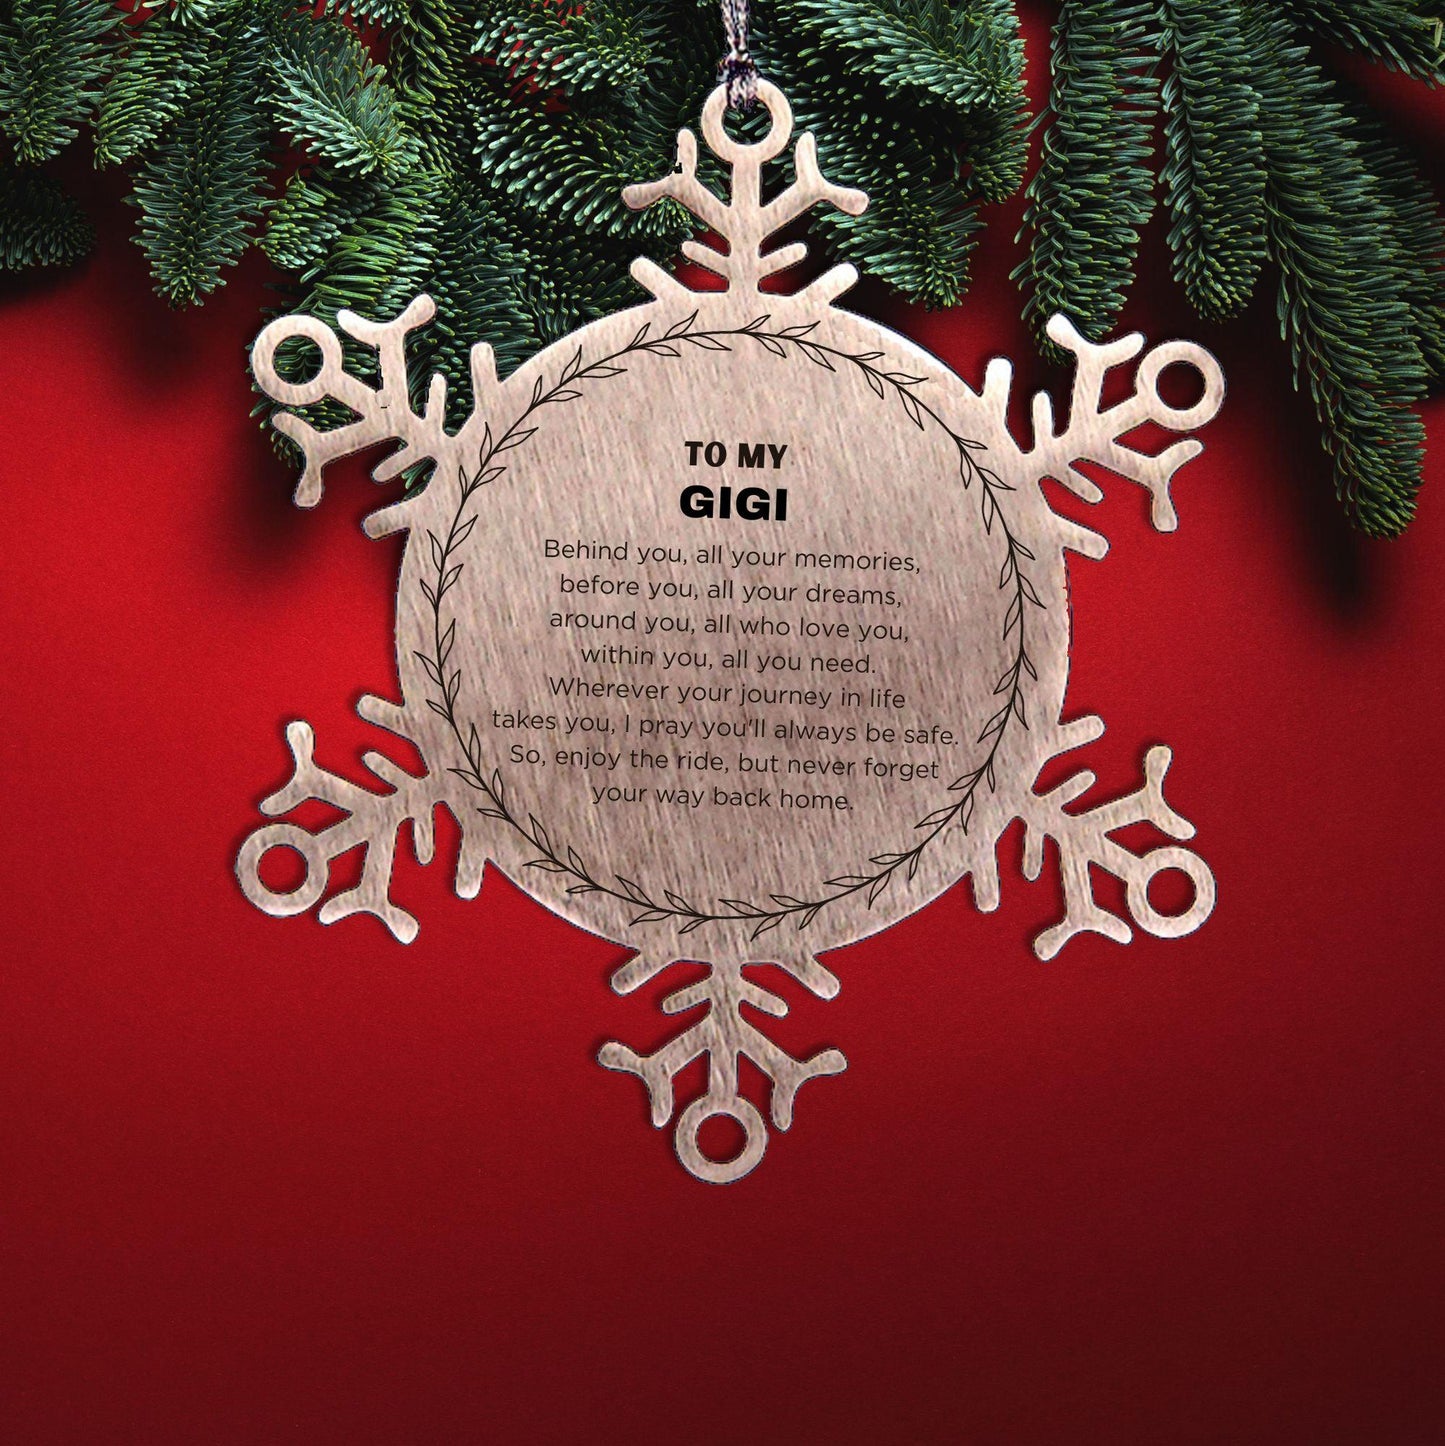 Inspirational Gigi Snowflake Ornament - Behind you, all your Memories, Before you, all your Dreams - Birthday, Christmas Holiday Gifts - Mallard Moon Gift Shop